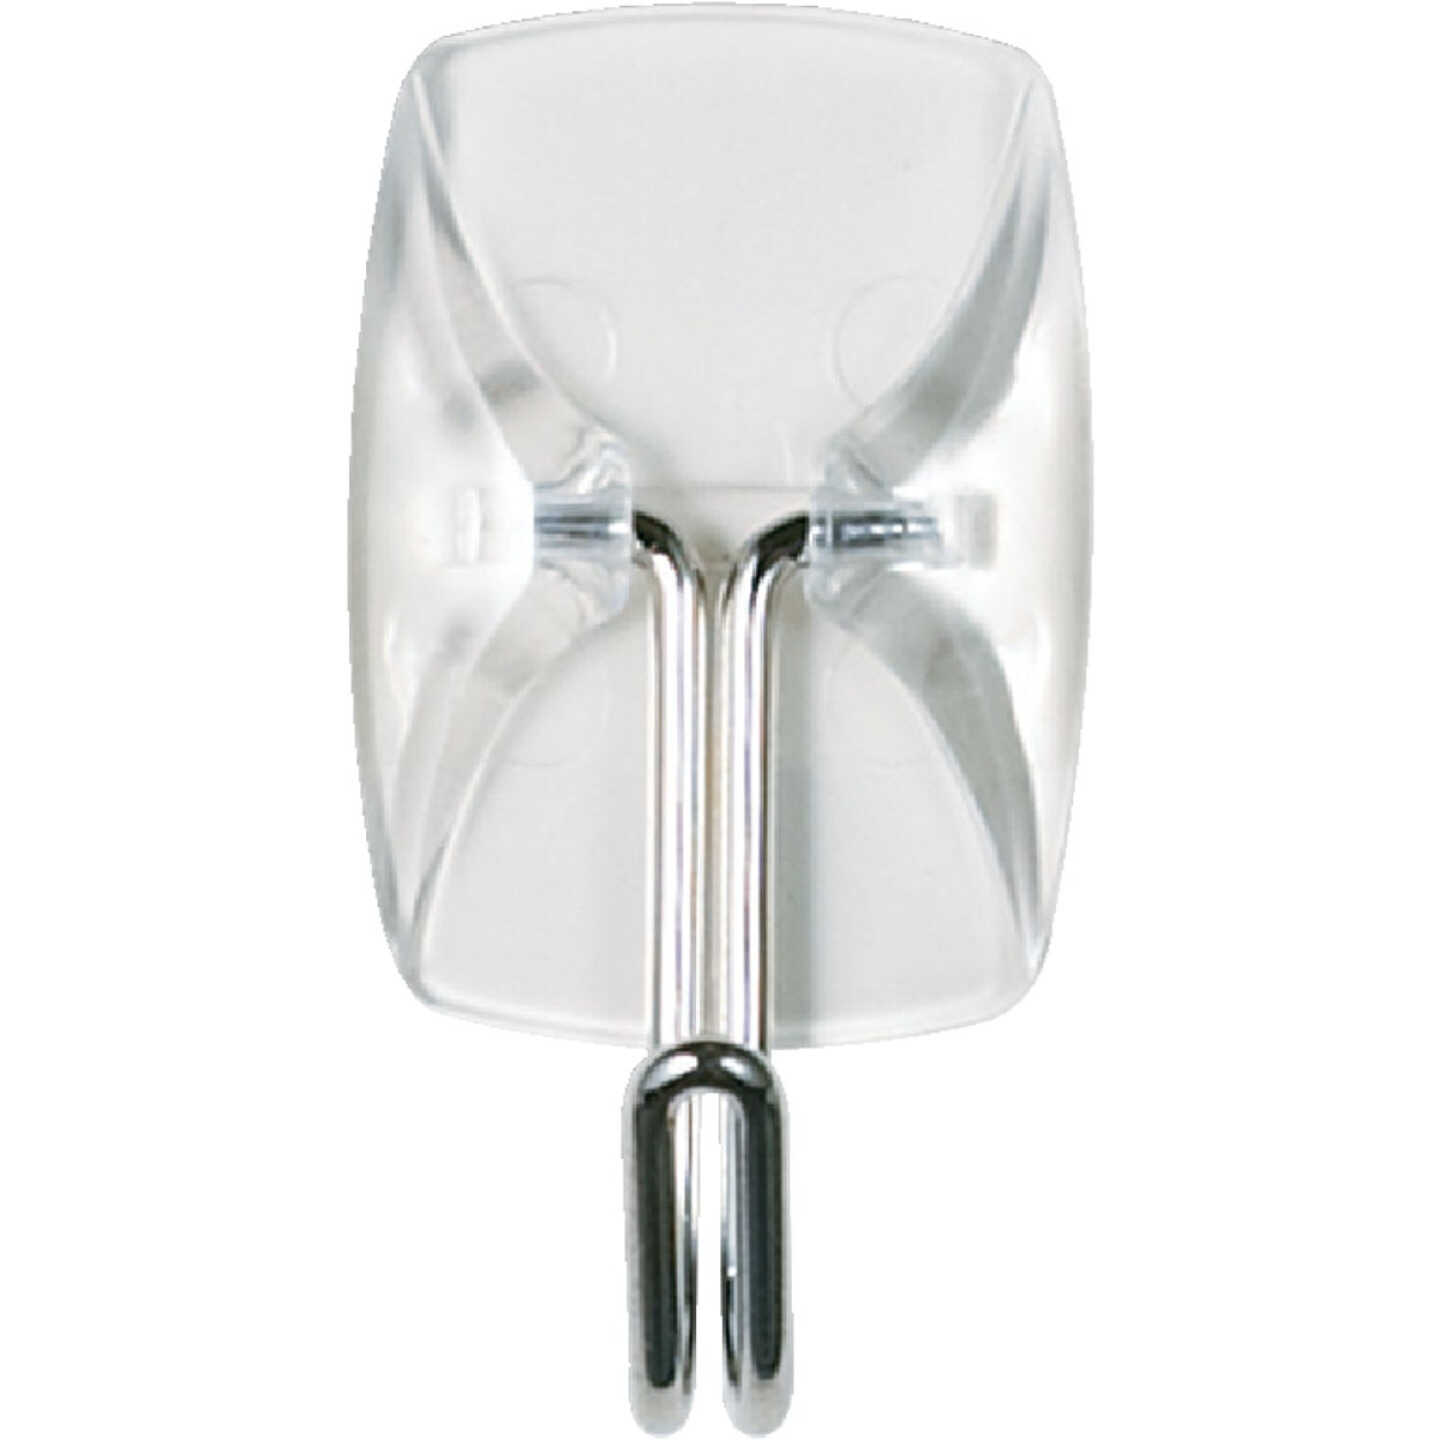 Command Large Clear Window Hook, with Outdoor Strips